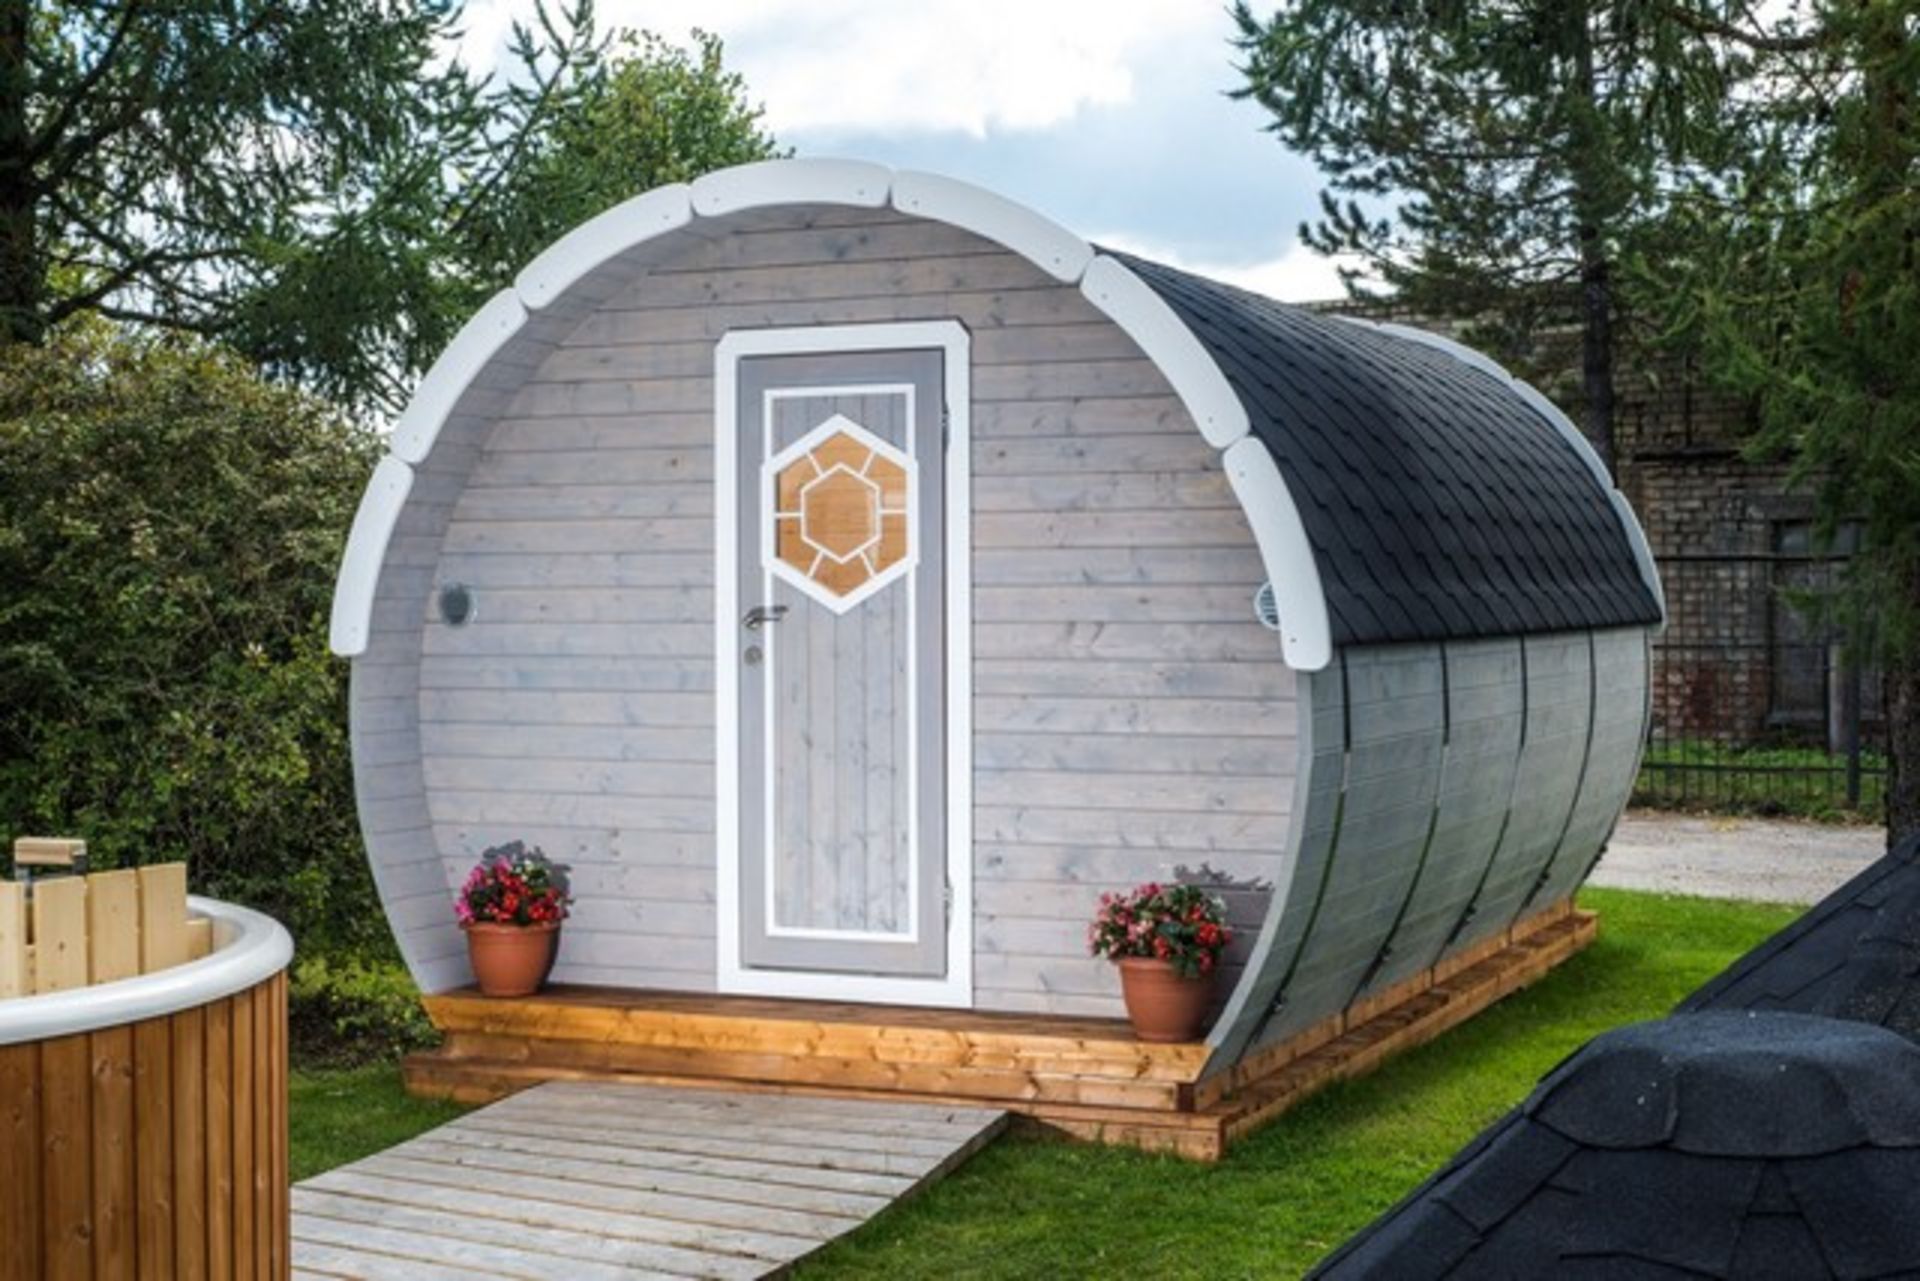 V Brand New 9.5M sq Ice-Viking Barrel- Two Rooms (2x2.3m Sleeping Room and Entrance room with - Image 2 of 6